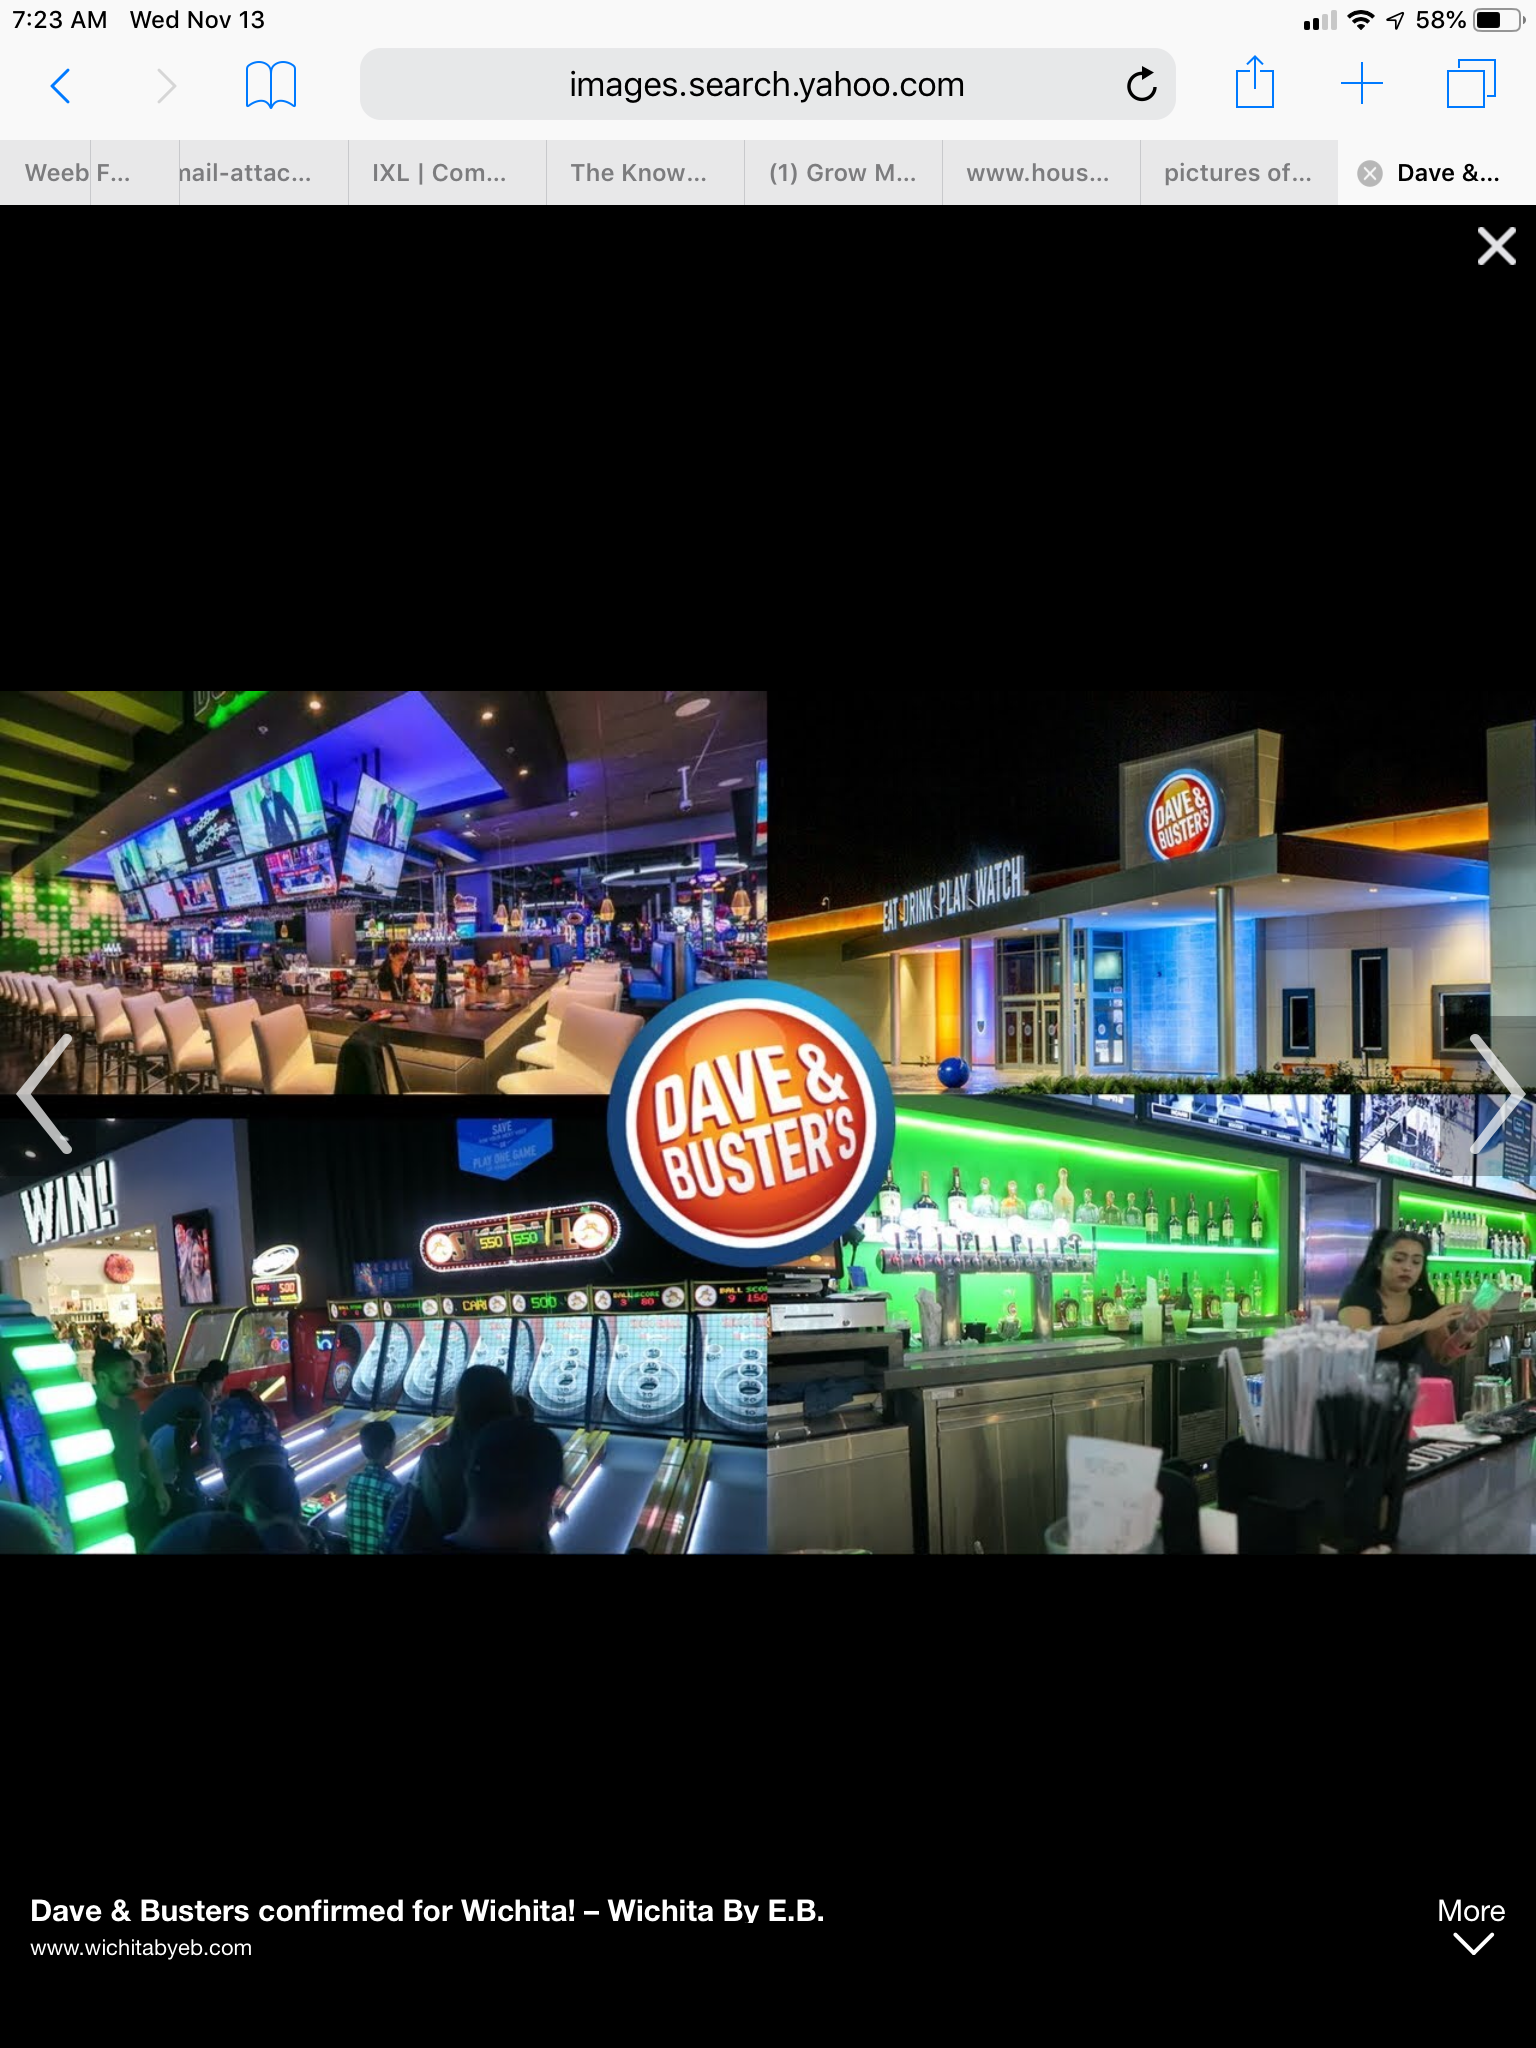 Dave & Buster’s Girls Night Out Event!